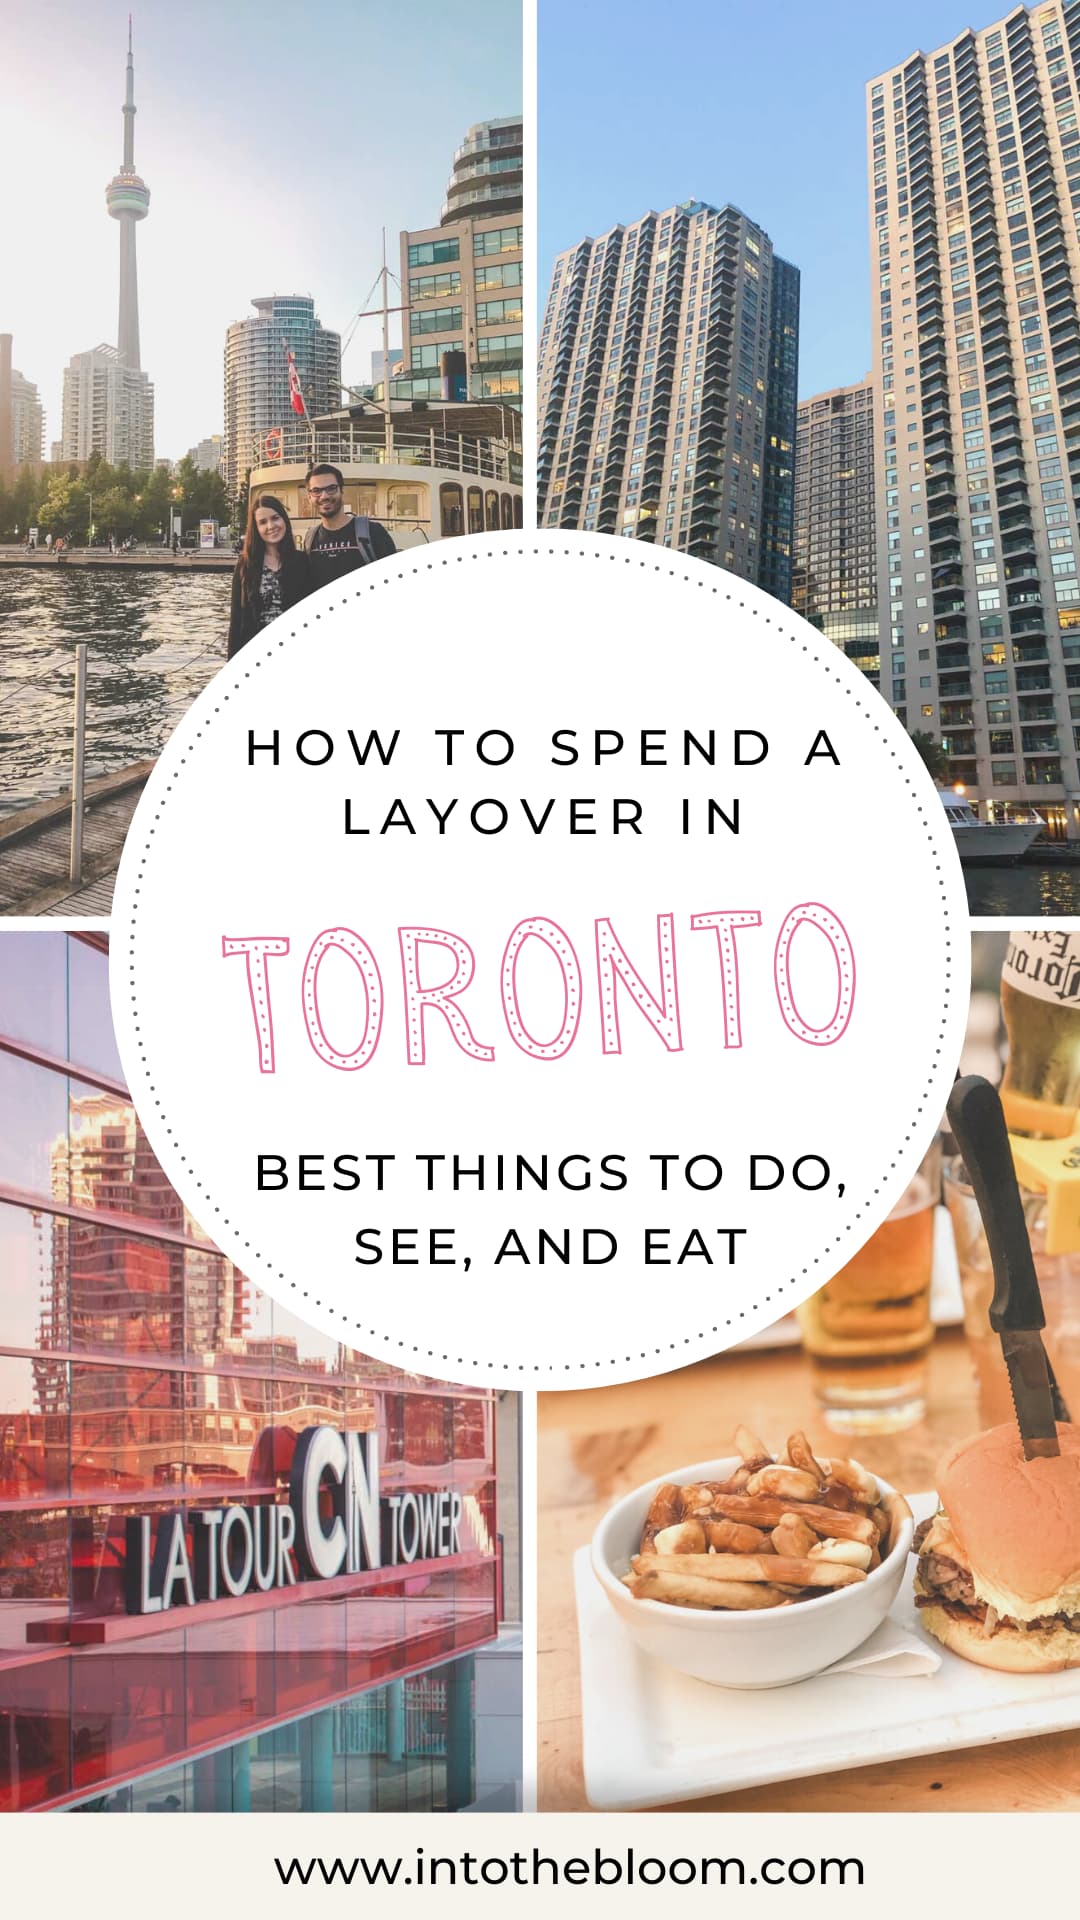 Travel guide describing how to spend a layover in Toronto - best things to do, see, and eat